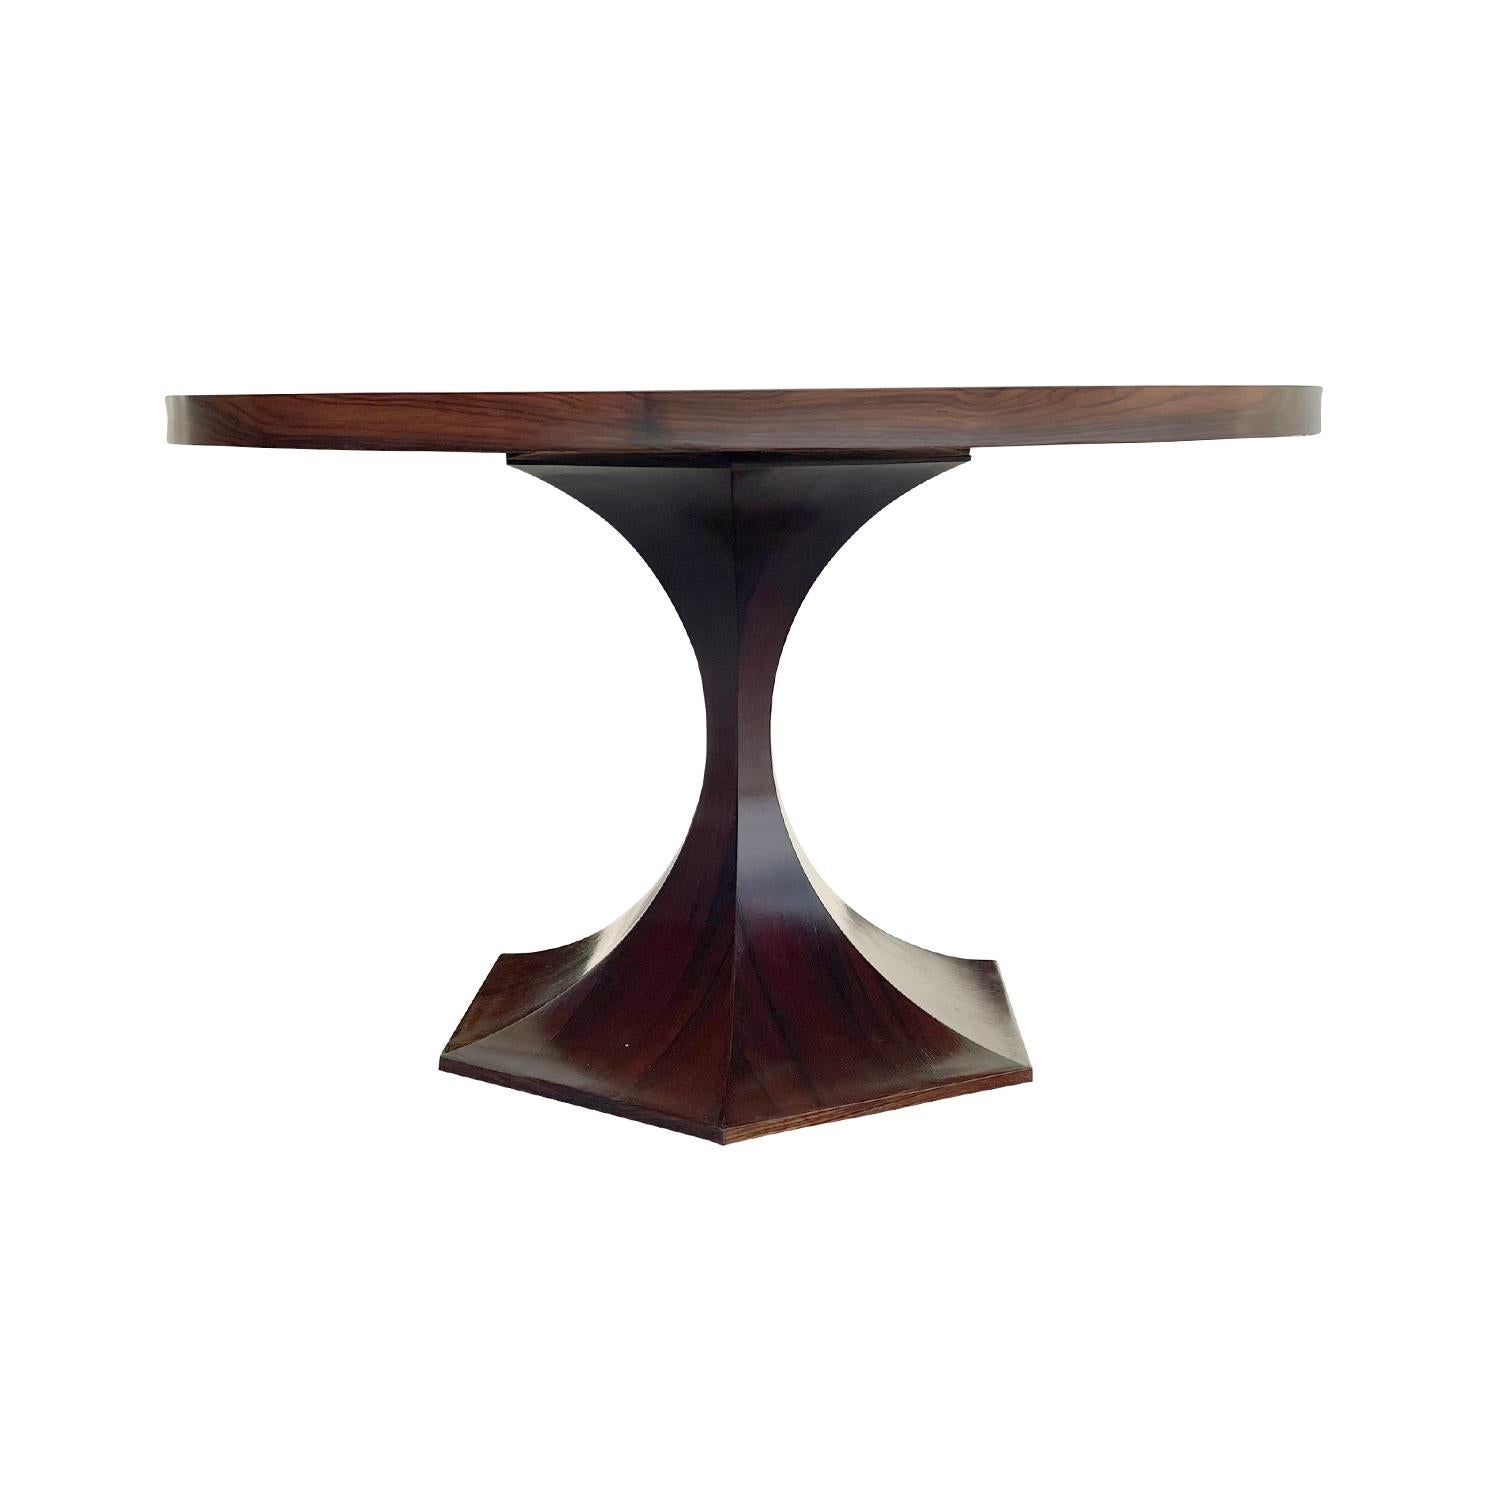 A round, vintage Mid-Century modern Italian dining room table made of hand crafted polished Rosewood, in good condition. The small center table is composed with a round table top, supported by a sculptural wooden base, enhanced by detailed wood